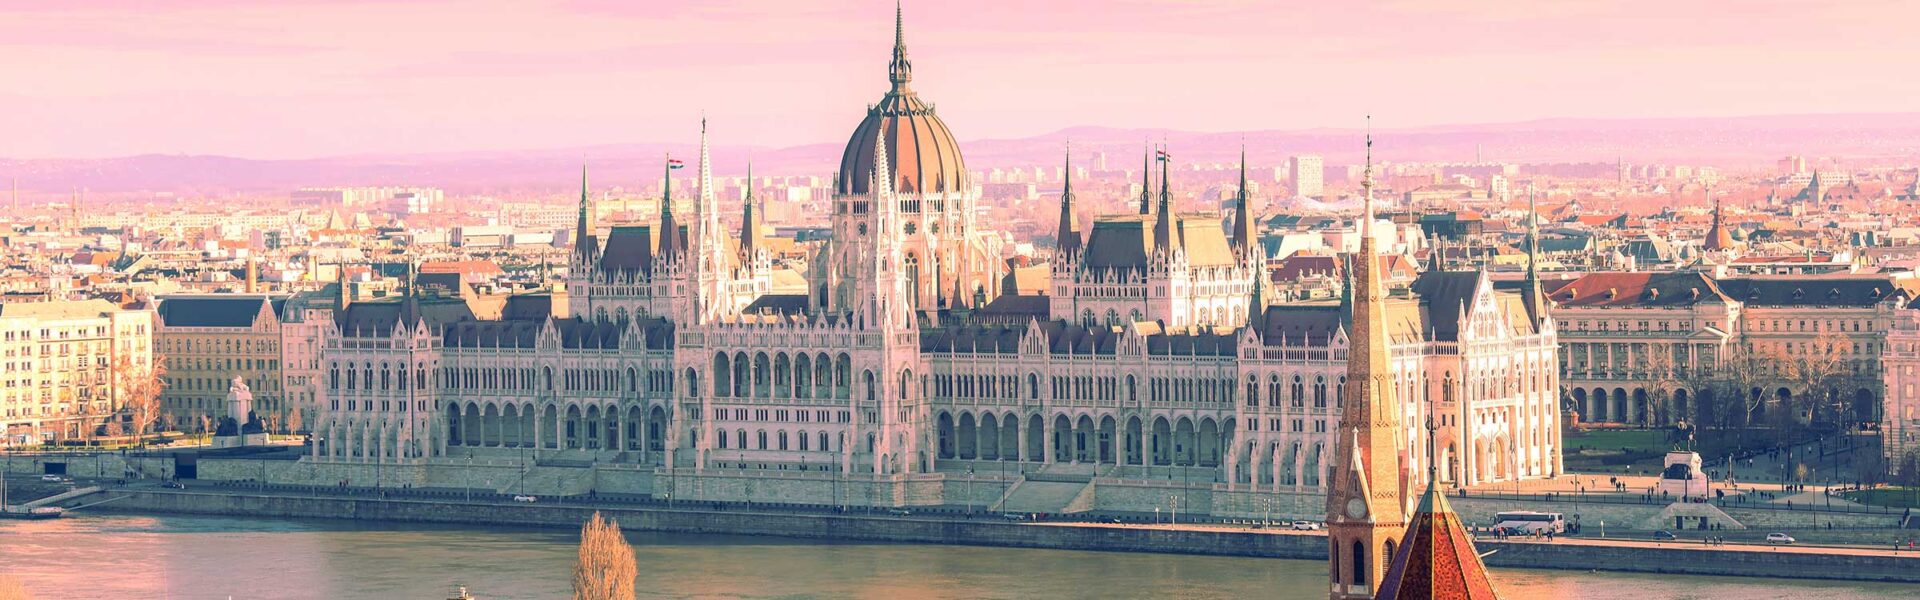 The Budapest Parliament building on the edge of the river at sunset.